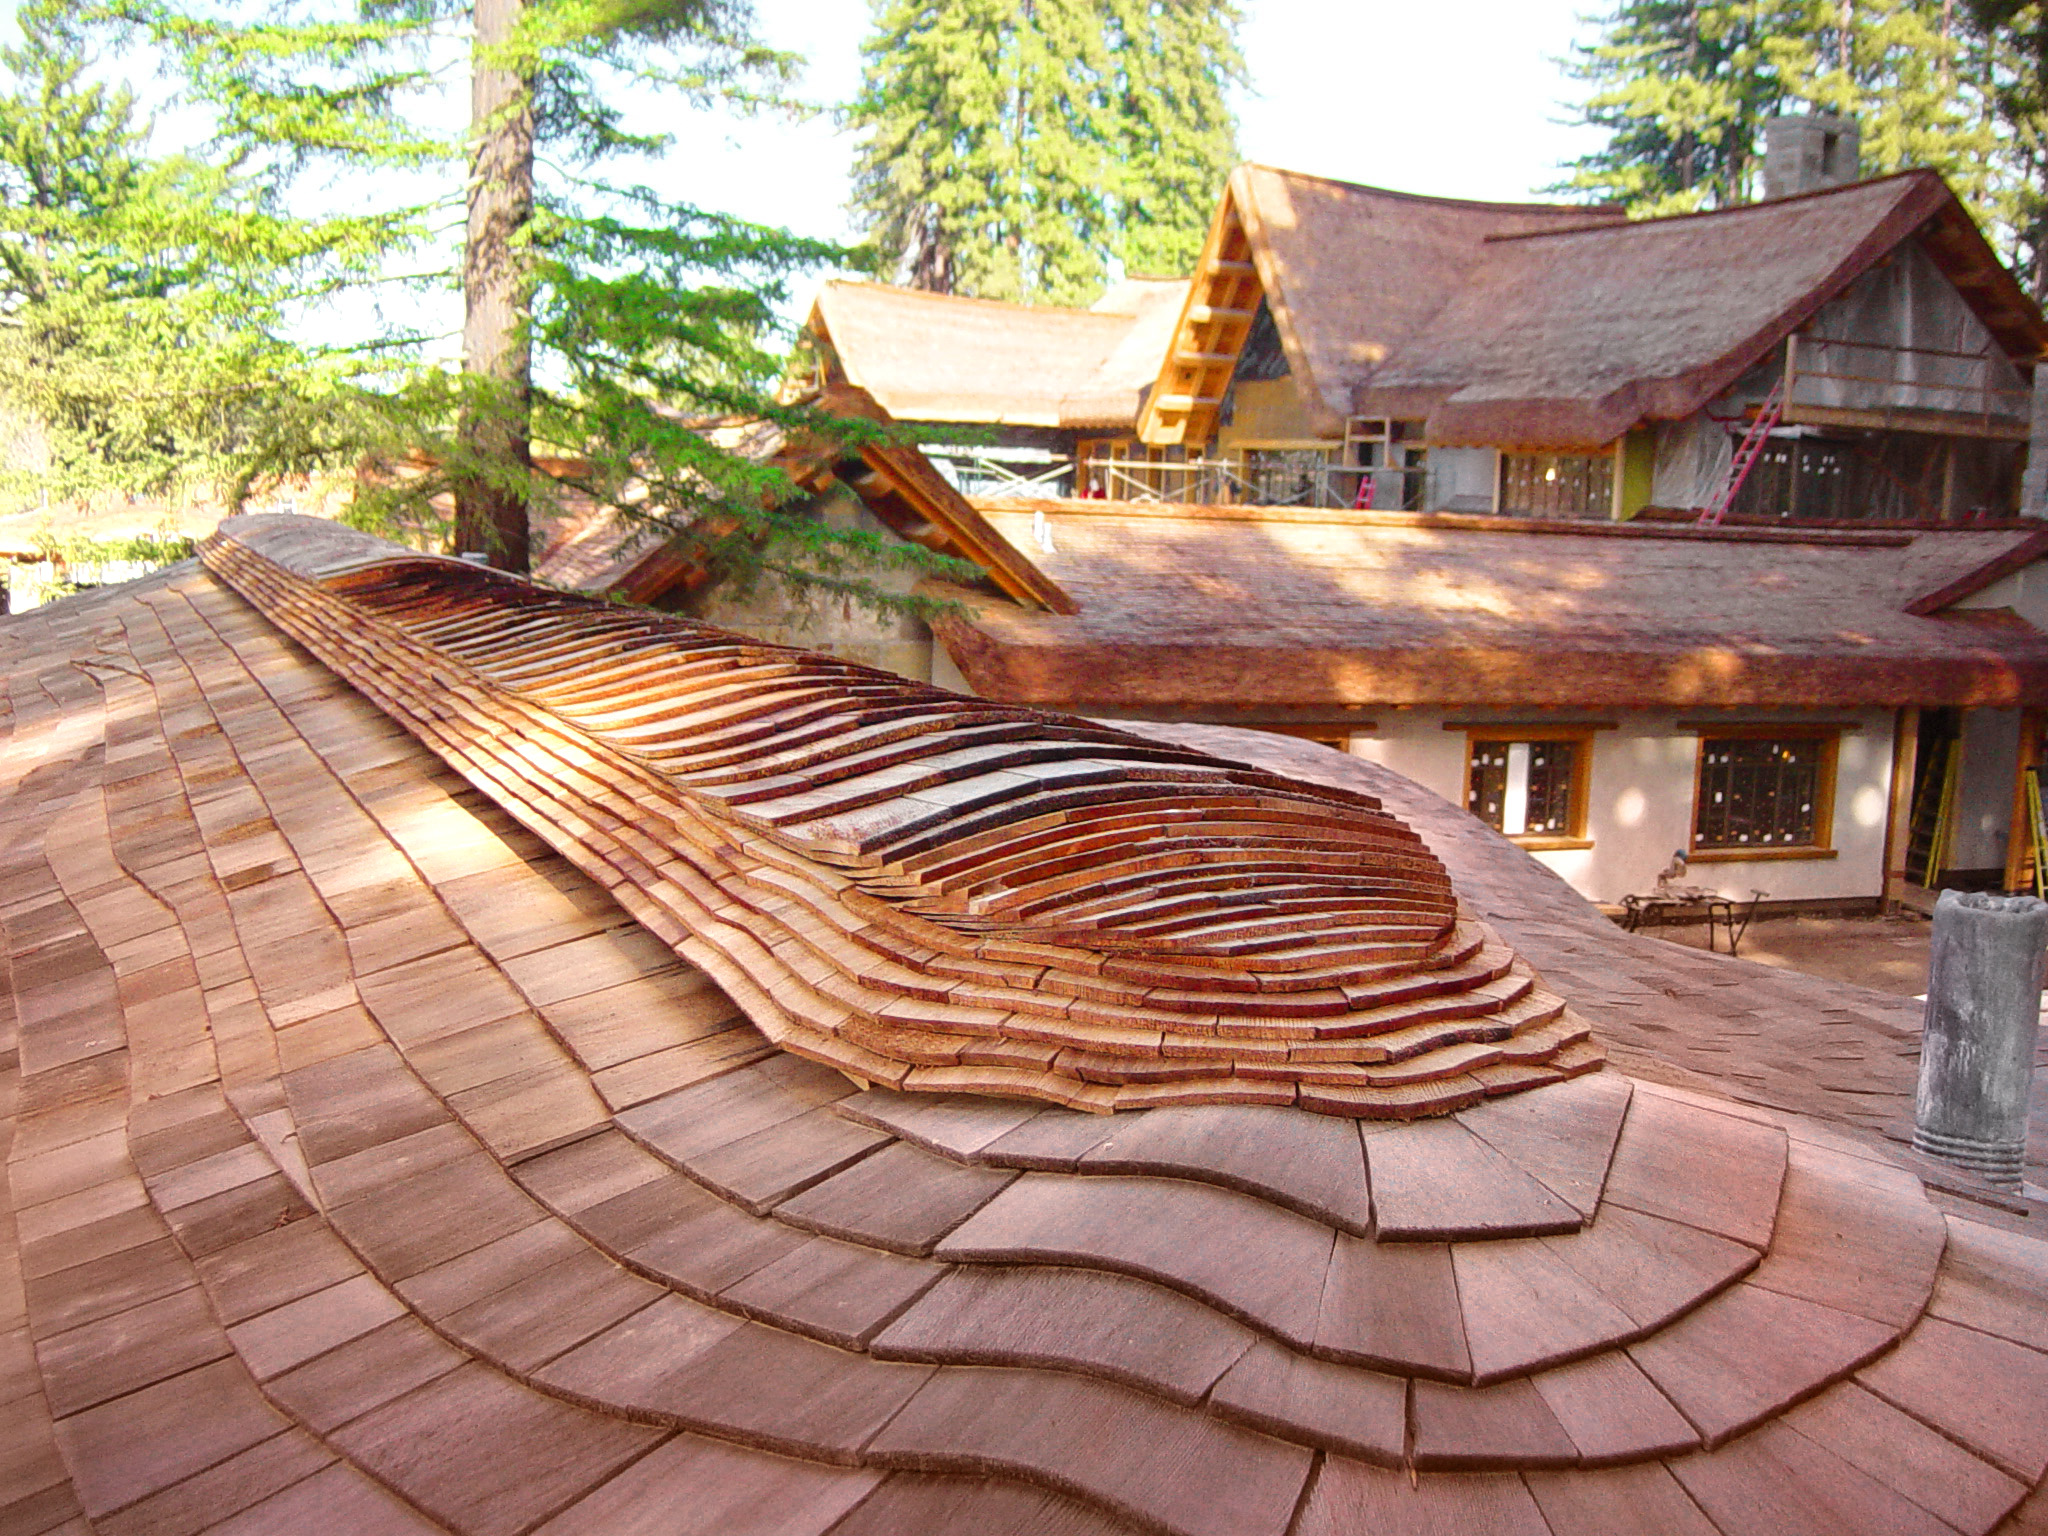 California-Zook-Style-Home-with-Built-up-Eaves-and-Curved-Ridge-(6).jpg